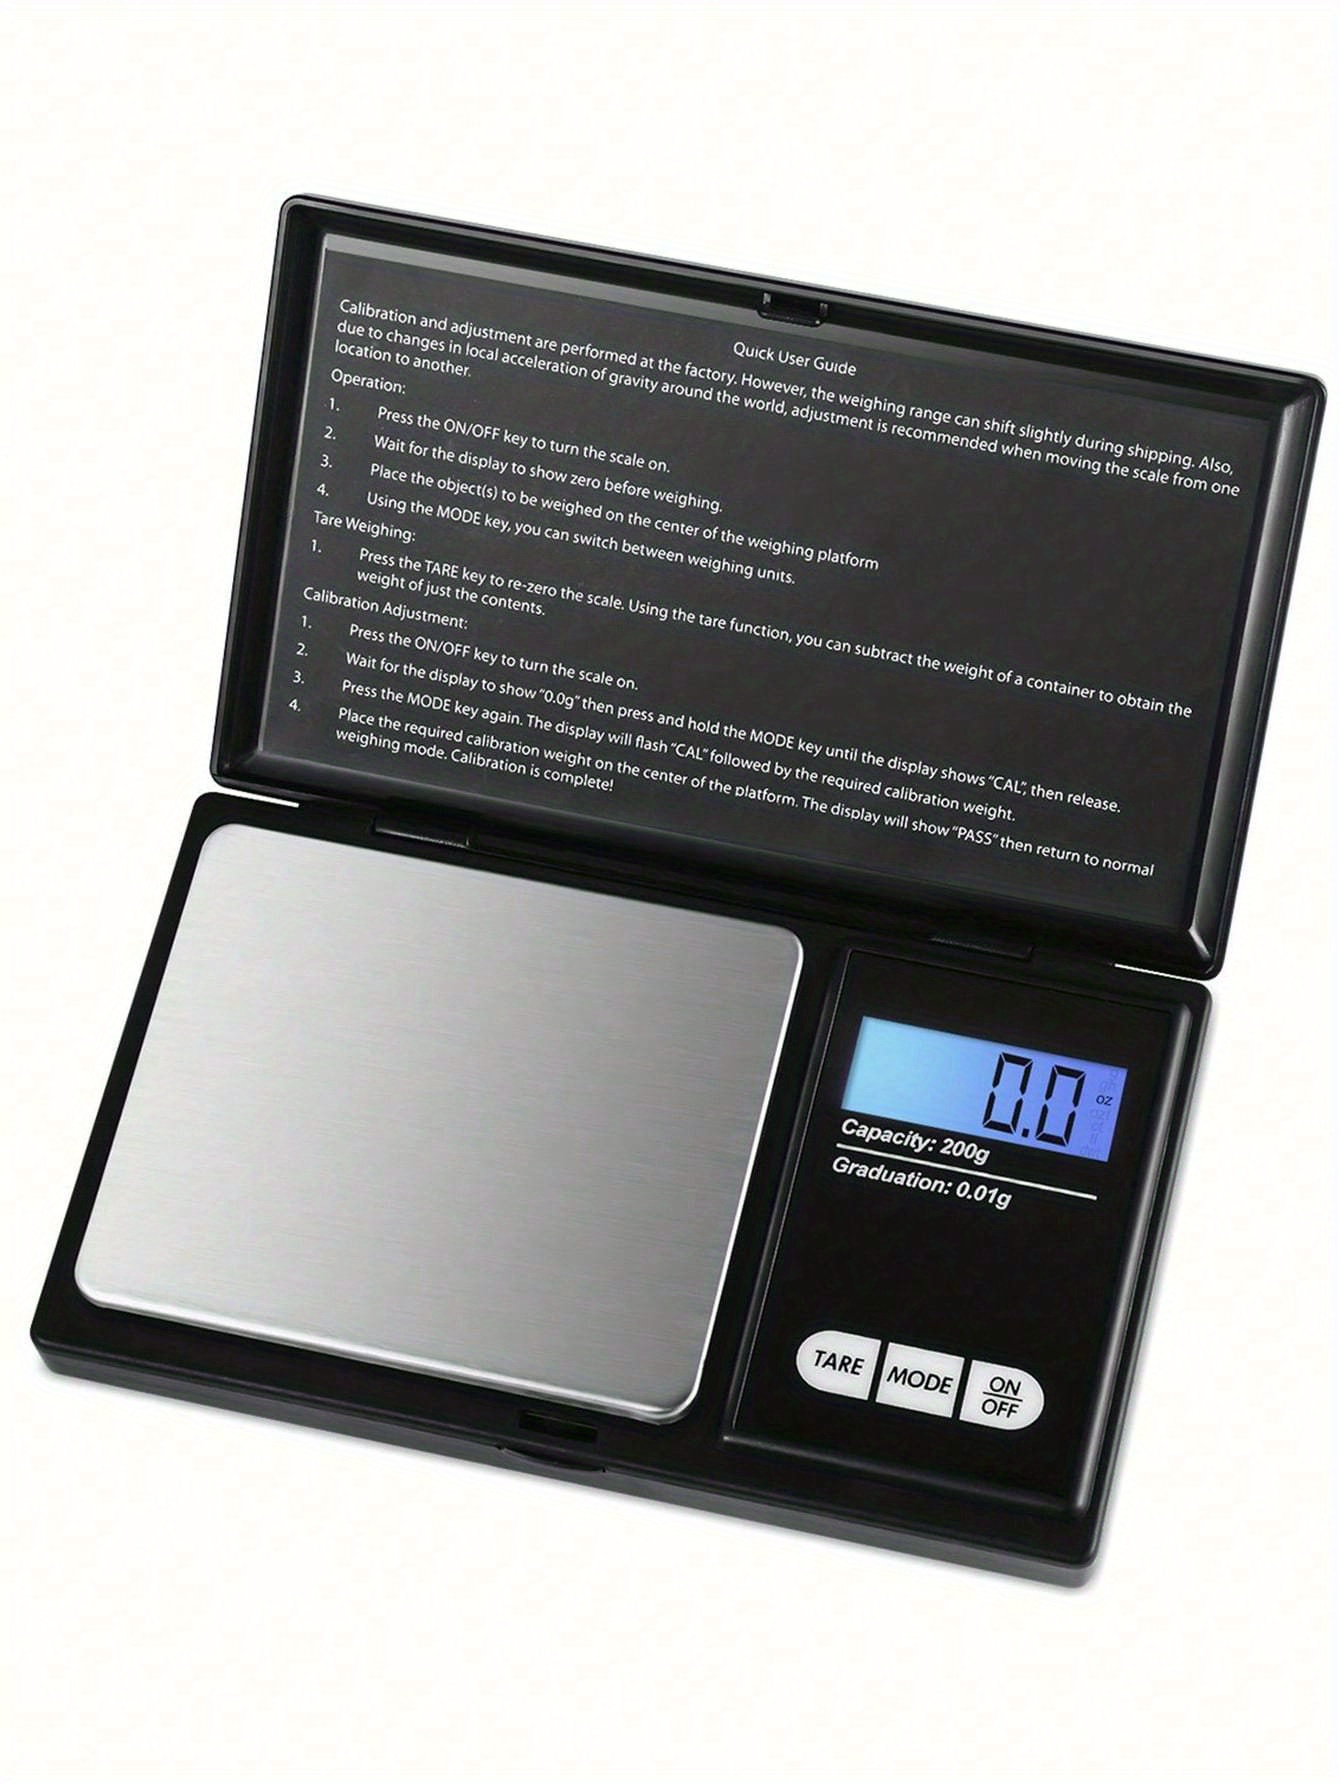 Digital Milligram Scale 0.001g, Portable Jewelry Scale with LCD